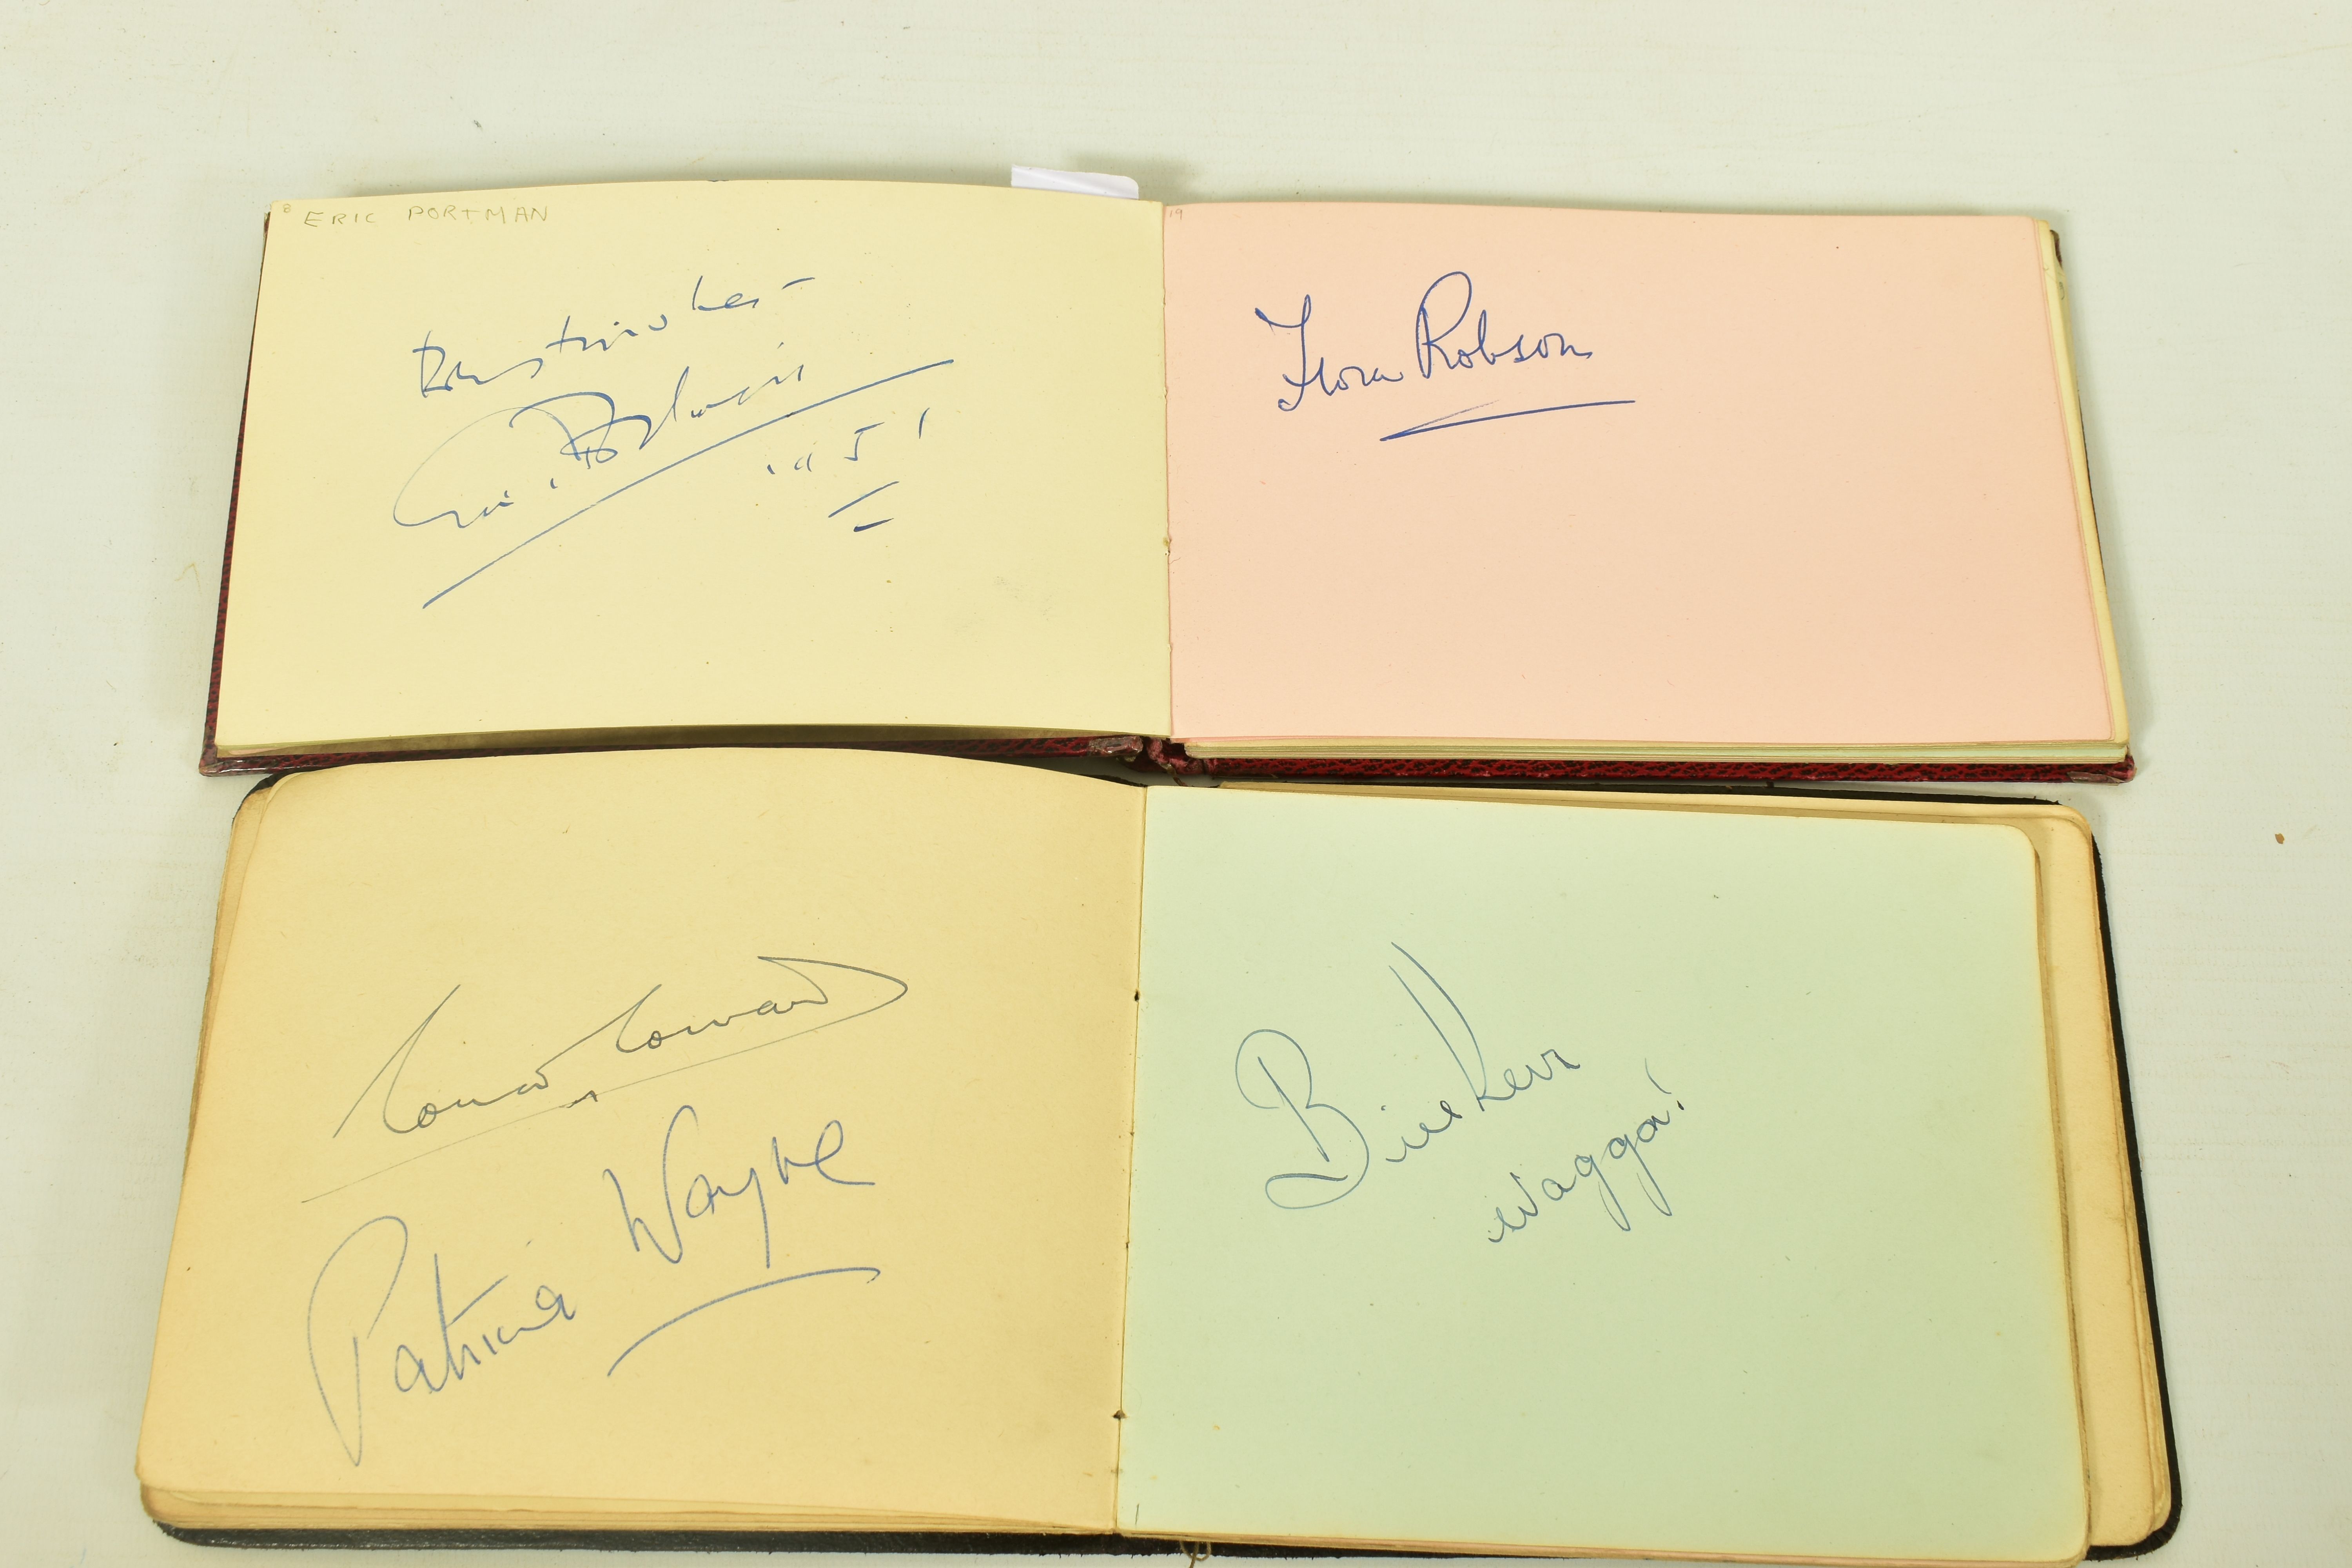 FILM & STAGE AUTOGRAPH ALBUM, a collection of signatures in two autograph albums featuring some of - Image 6 of 11